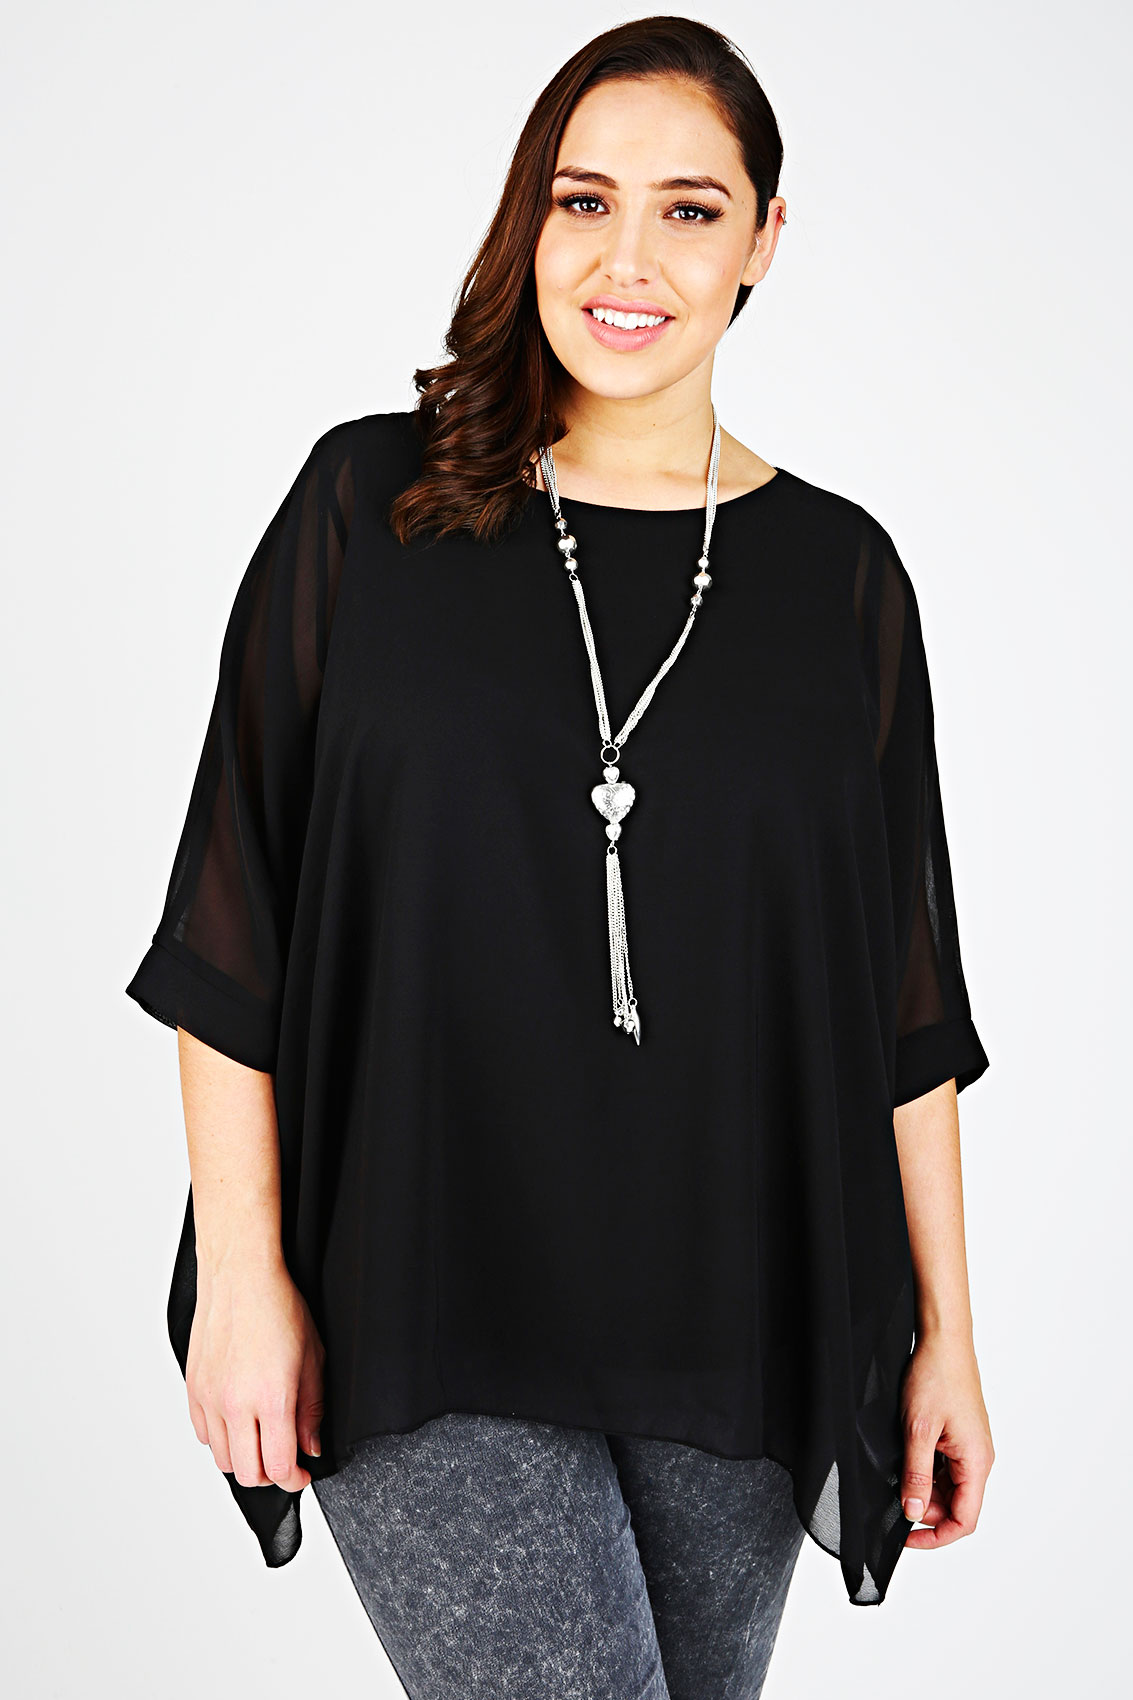 Black Bat Wing Sleeve Chiffon Top With Necklace Plus Size 14 to 36